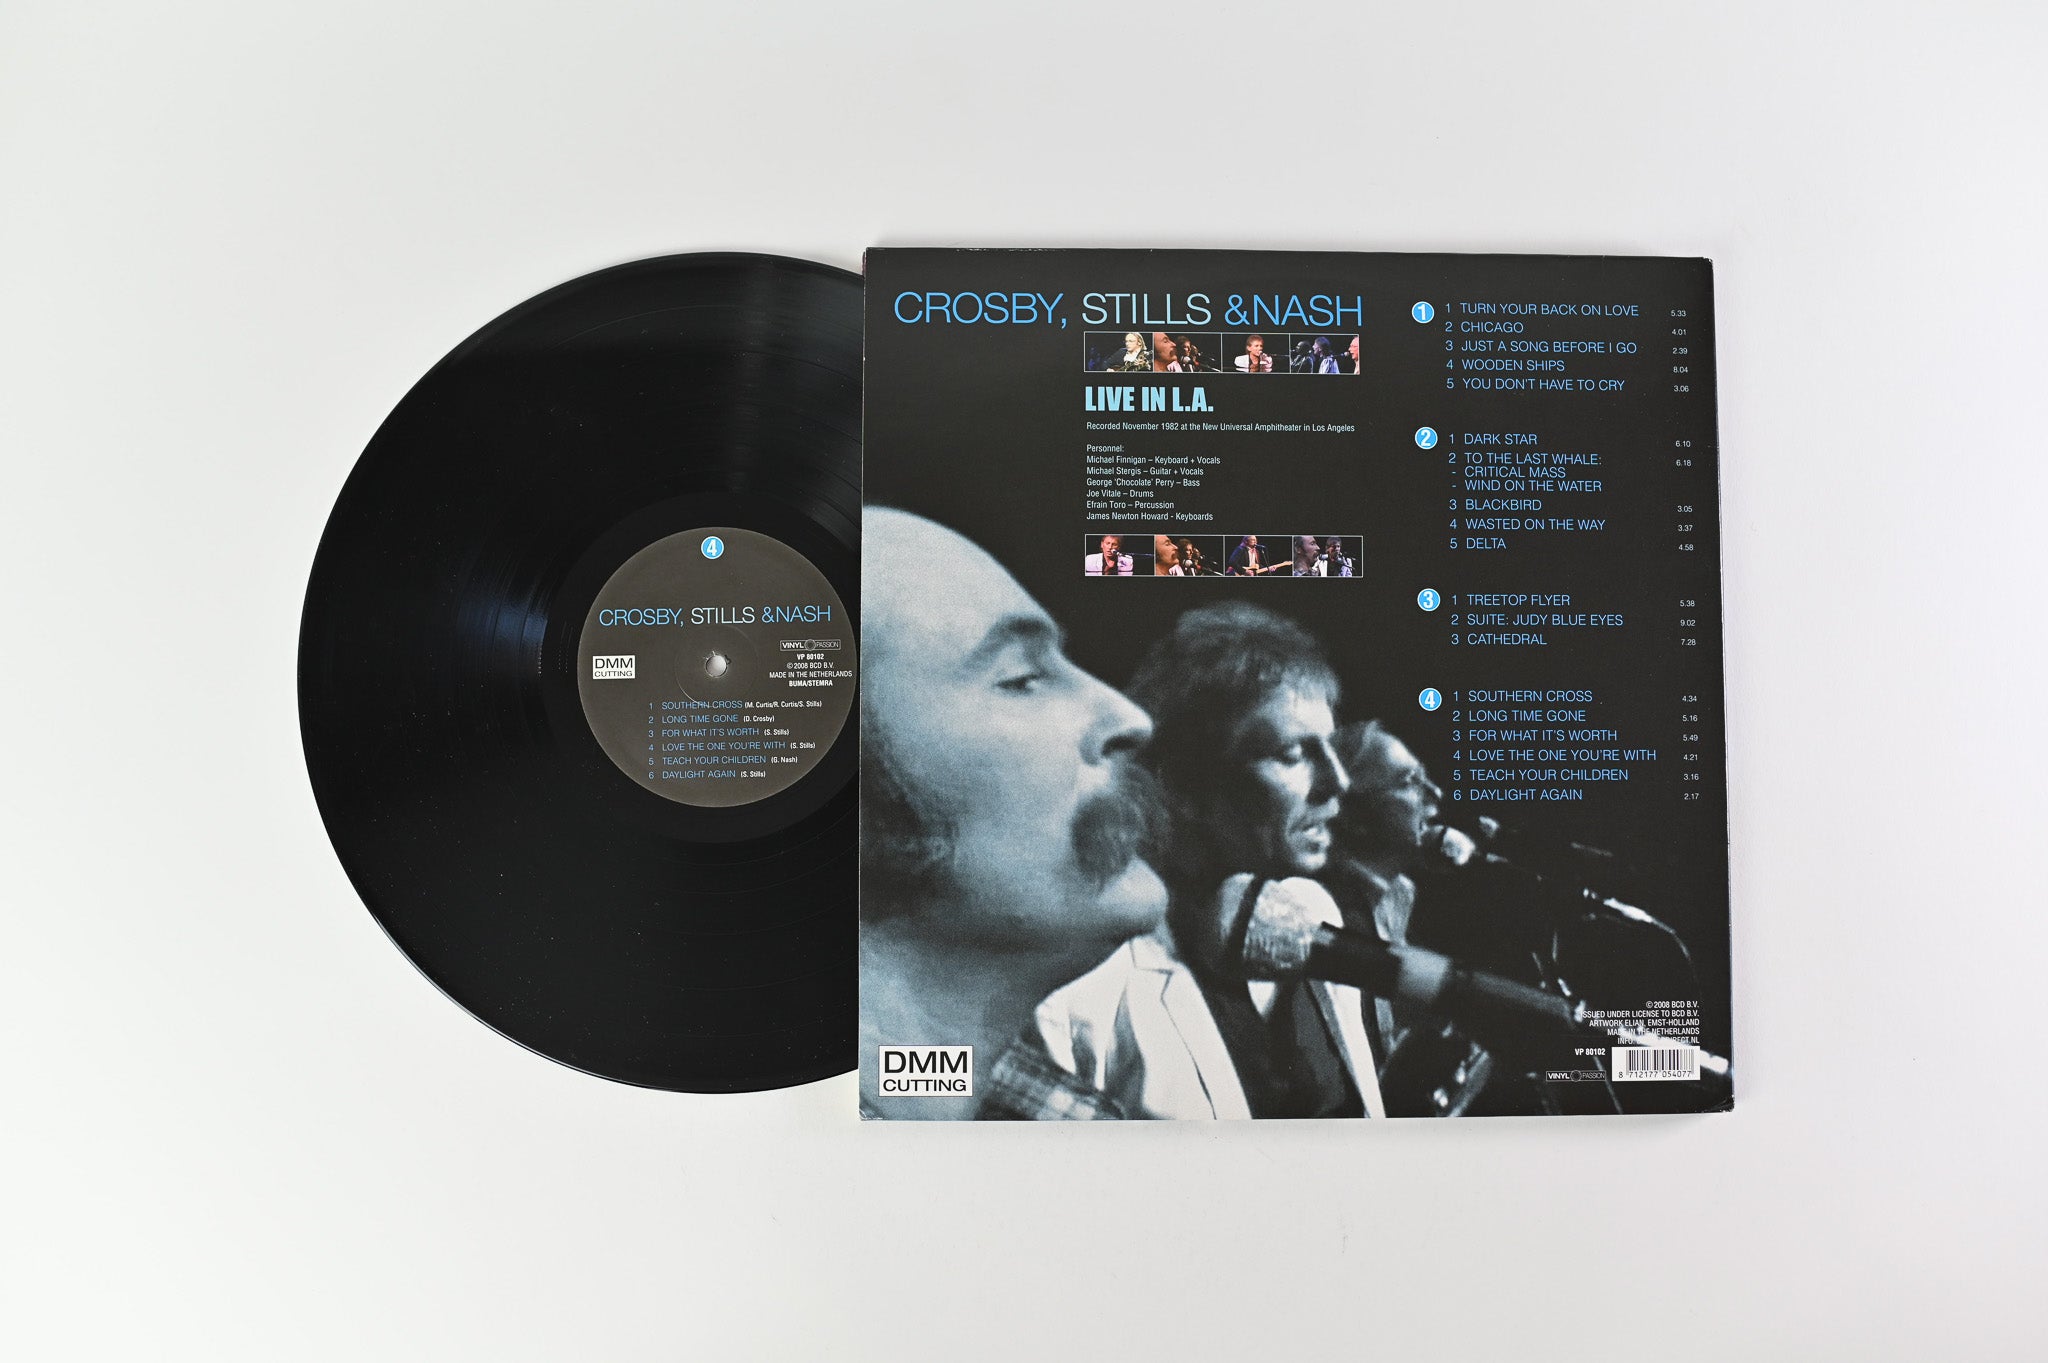 Crosby, Stills & Nash - Live In L.A. Unofficial Release on Vinyl Passion